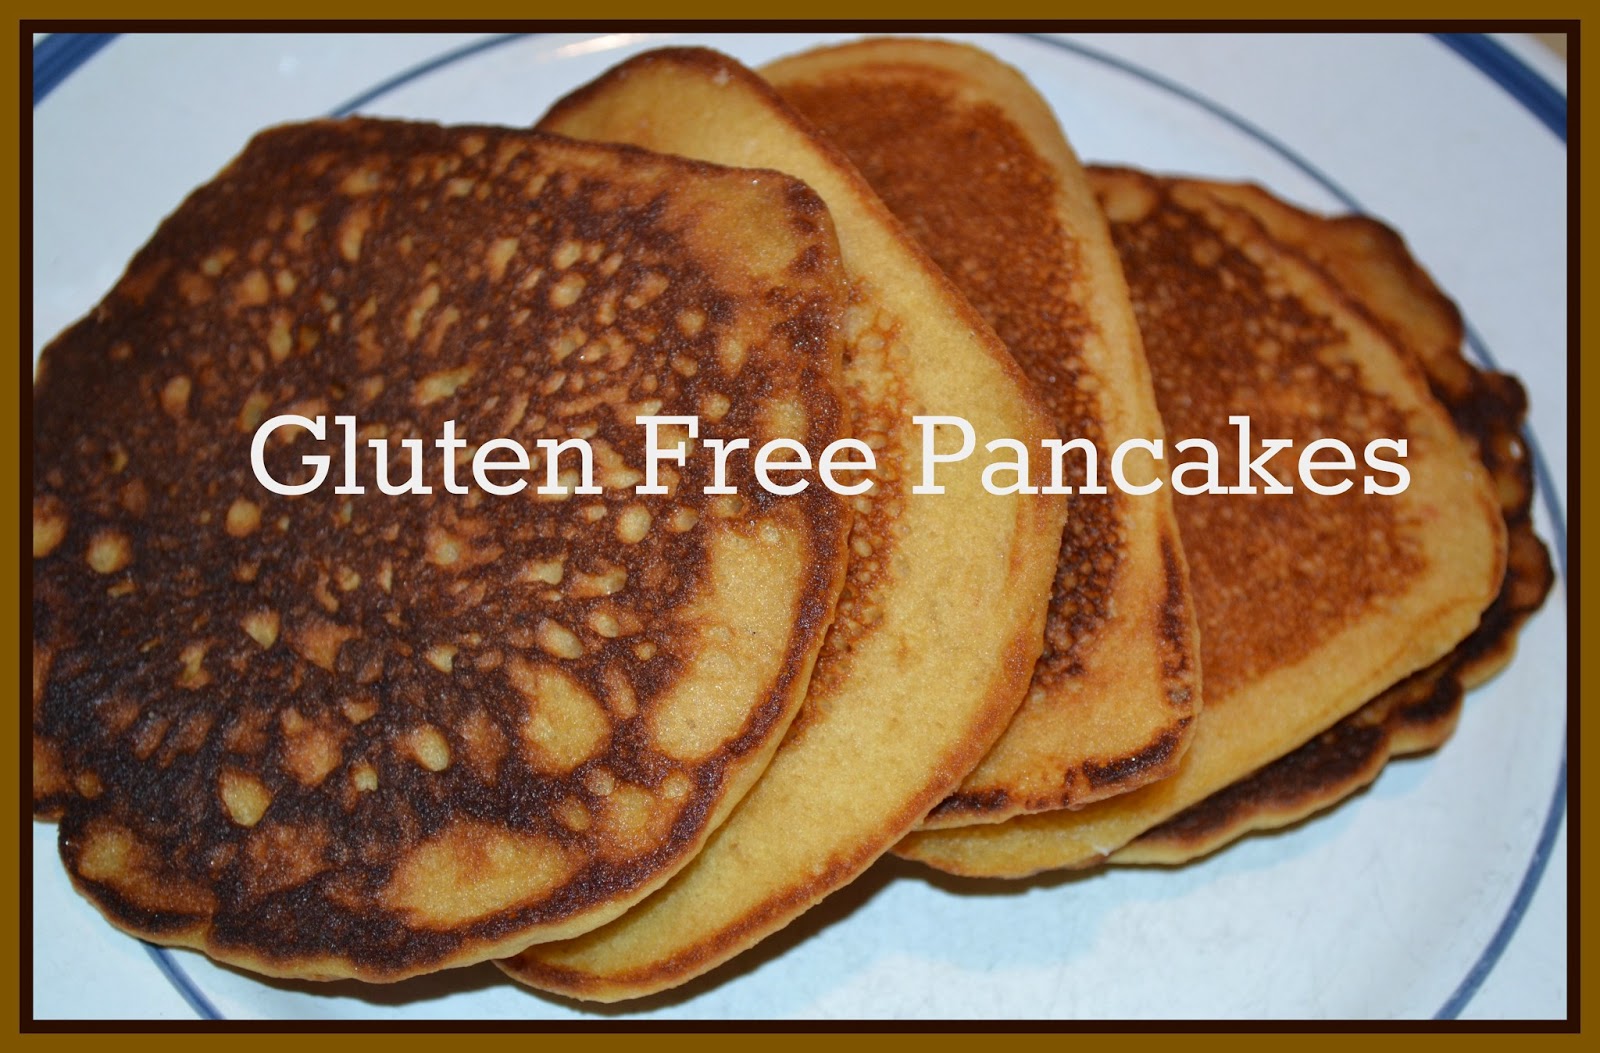 cup free to make pancakes  gluten about 8 pancakes pancakes kefir how makes 2 1 with